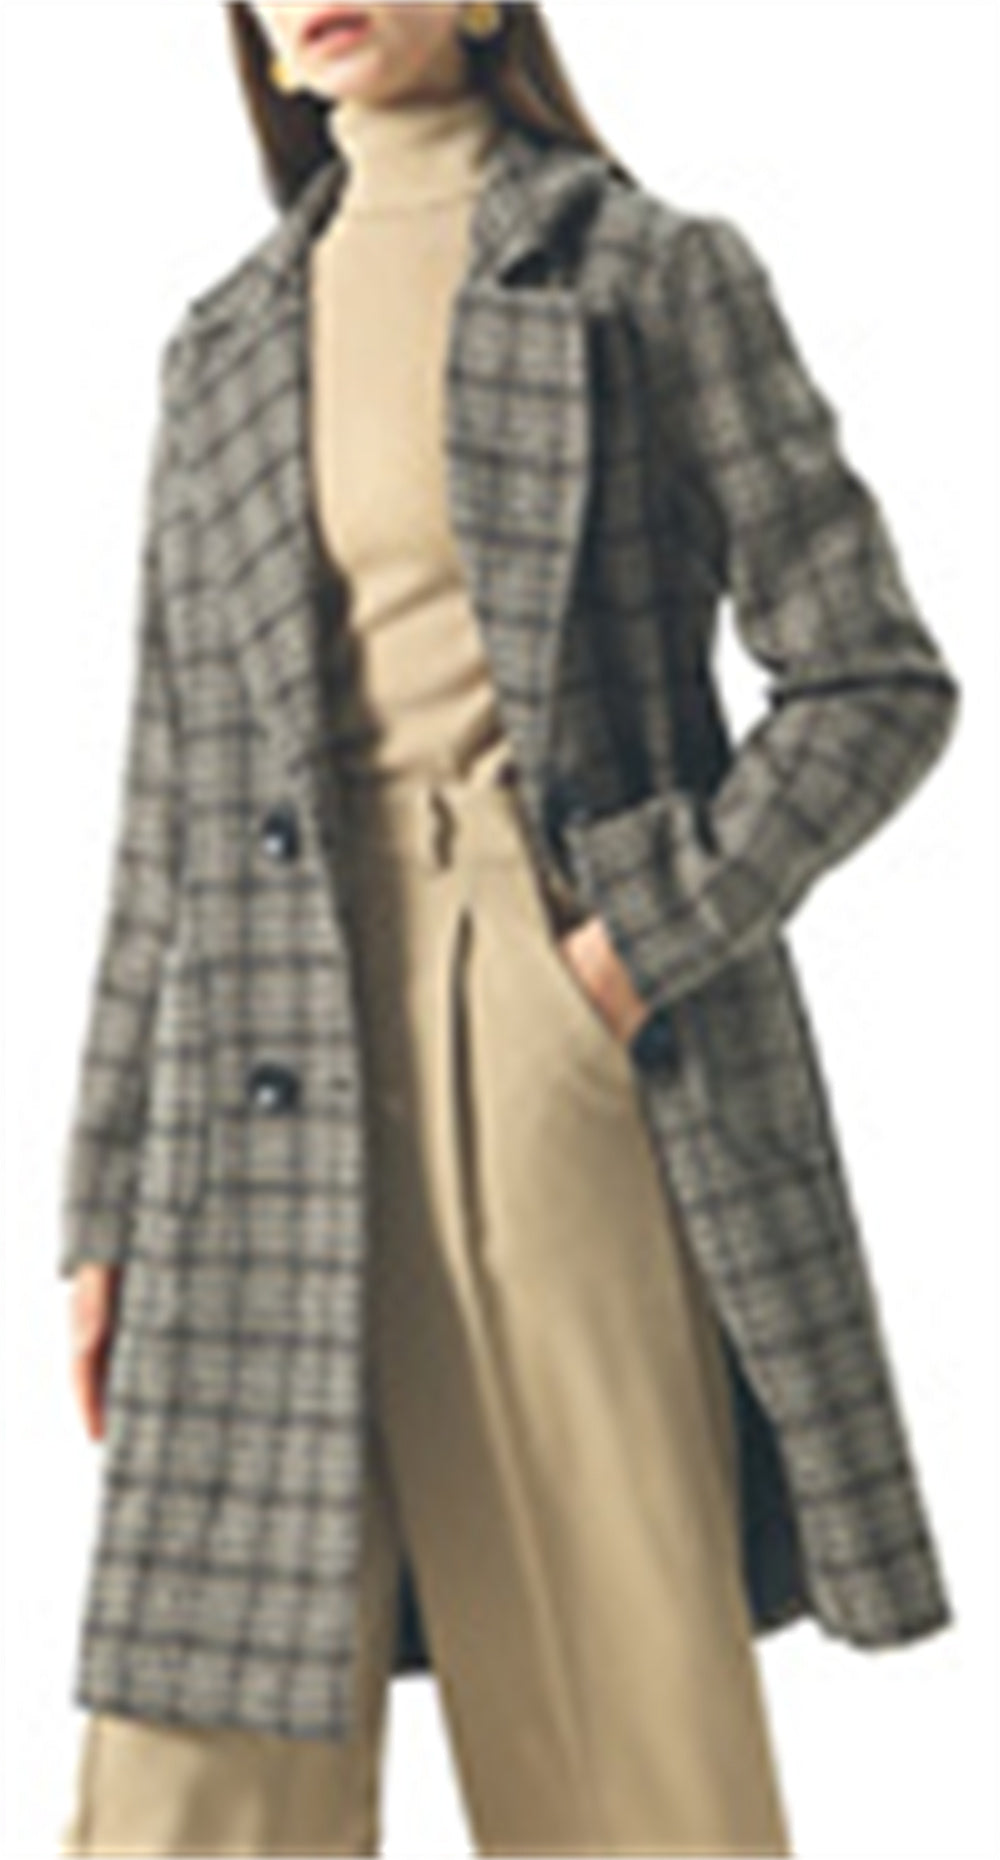 Chouyatou Women Elegant Notched Collar Double Breasted Wool Blend Over Coat